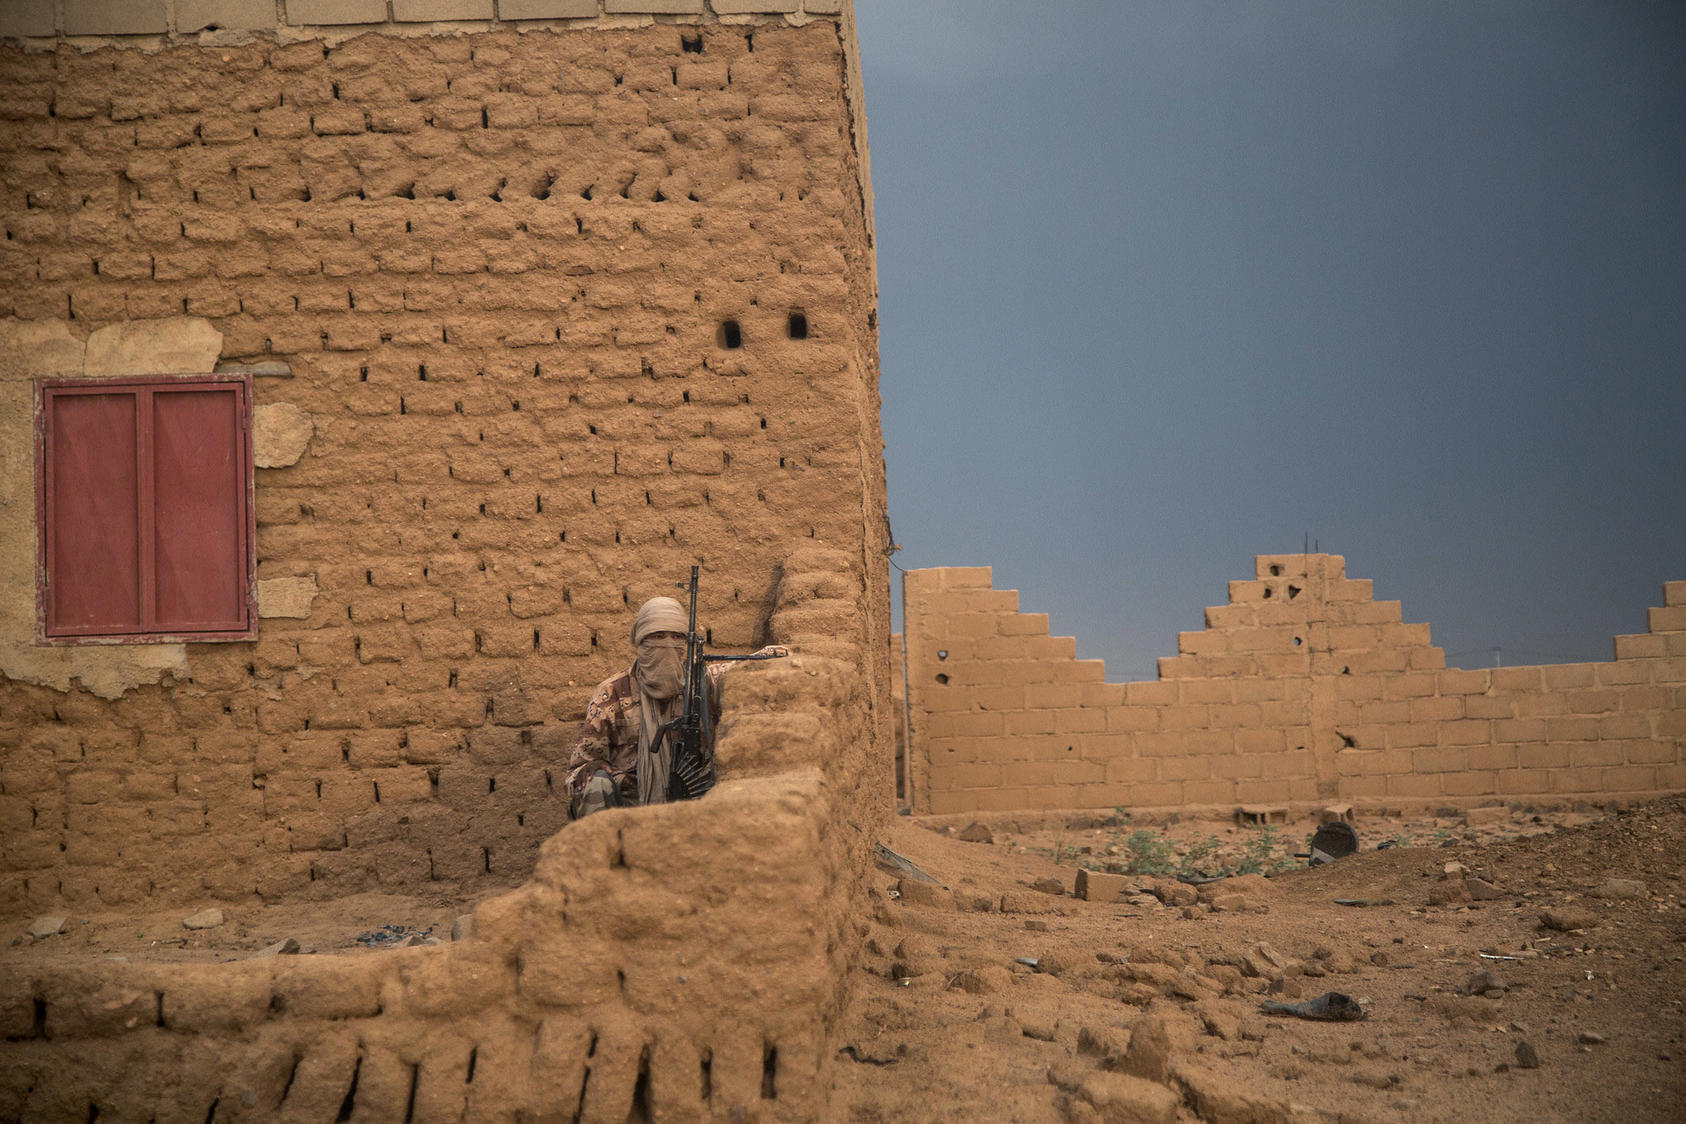 : A member of the Coordination des Mouvements de l'Azawad, a coalition of non-state armed groups in Northern Mali. September 14, 2015. (Marco Dormino/U.N. Photo)